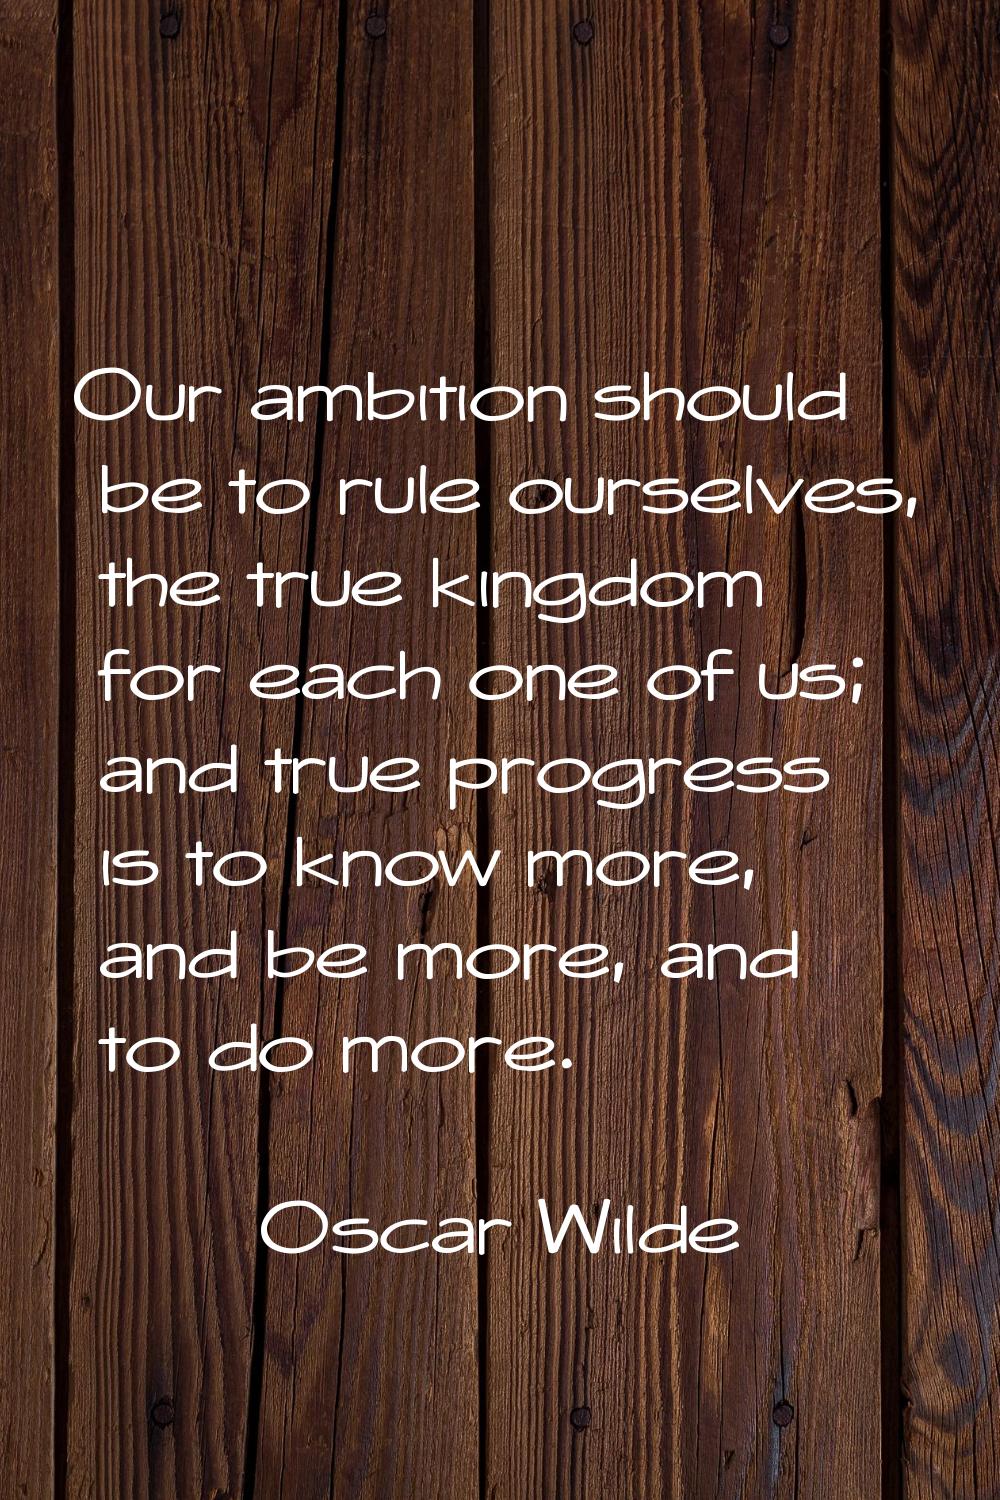 Our ambition should be to rule ourselves, the true kingdom for each one of us; and true progress is